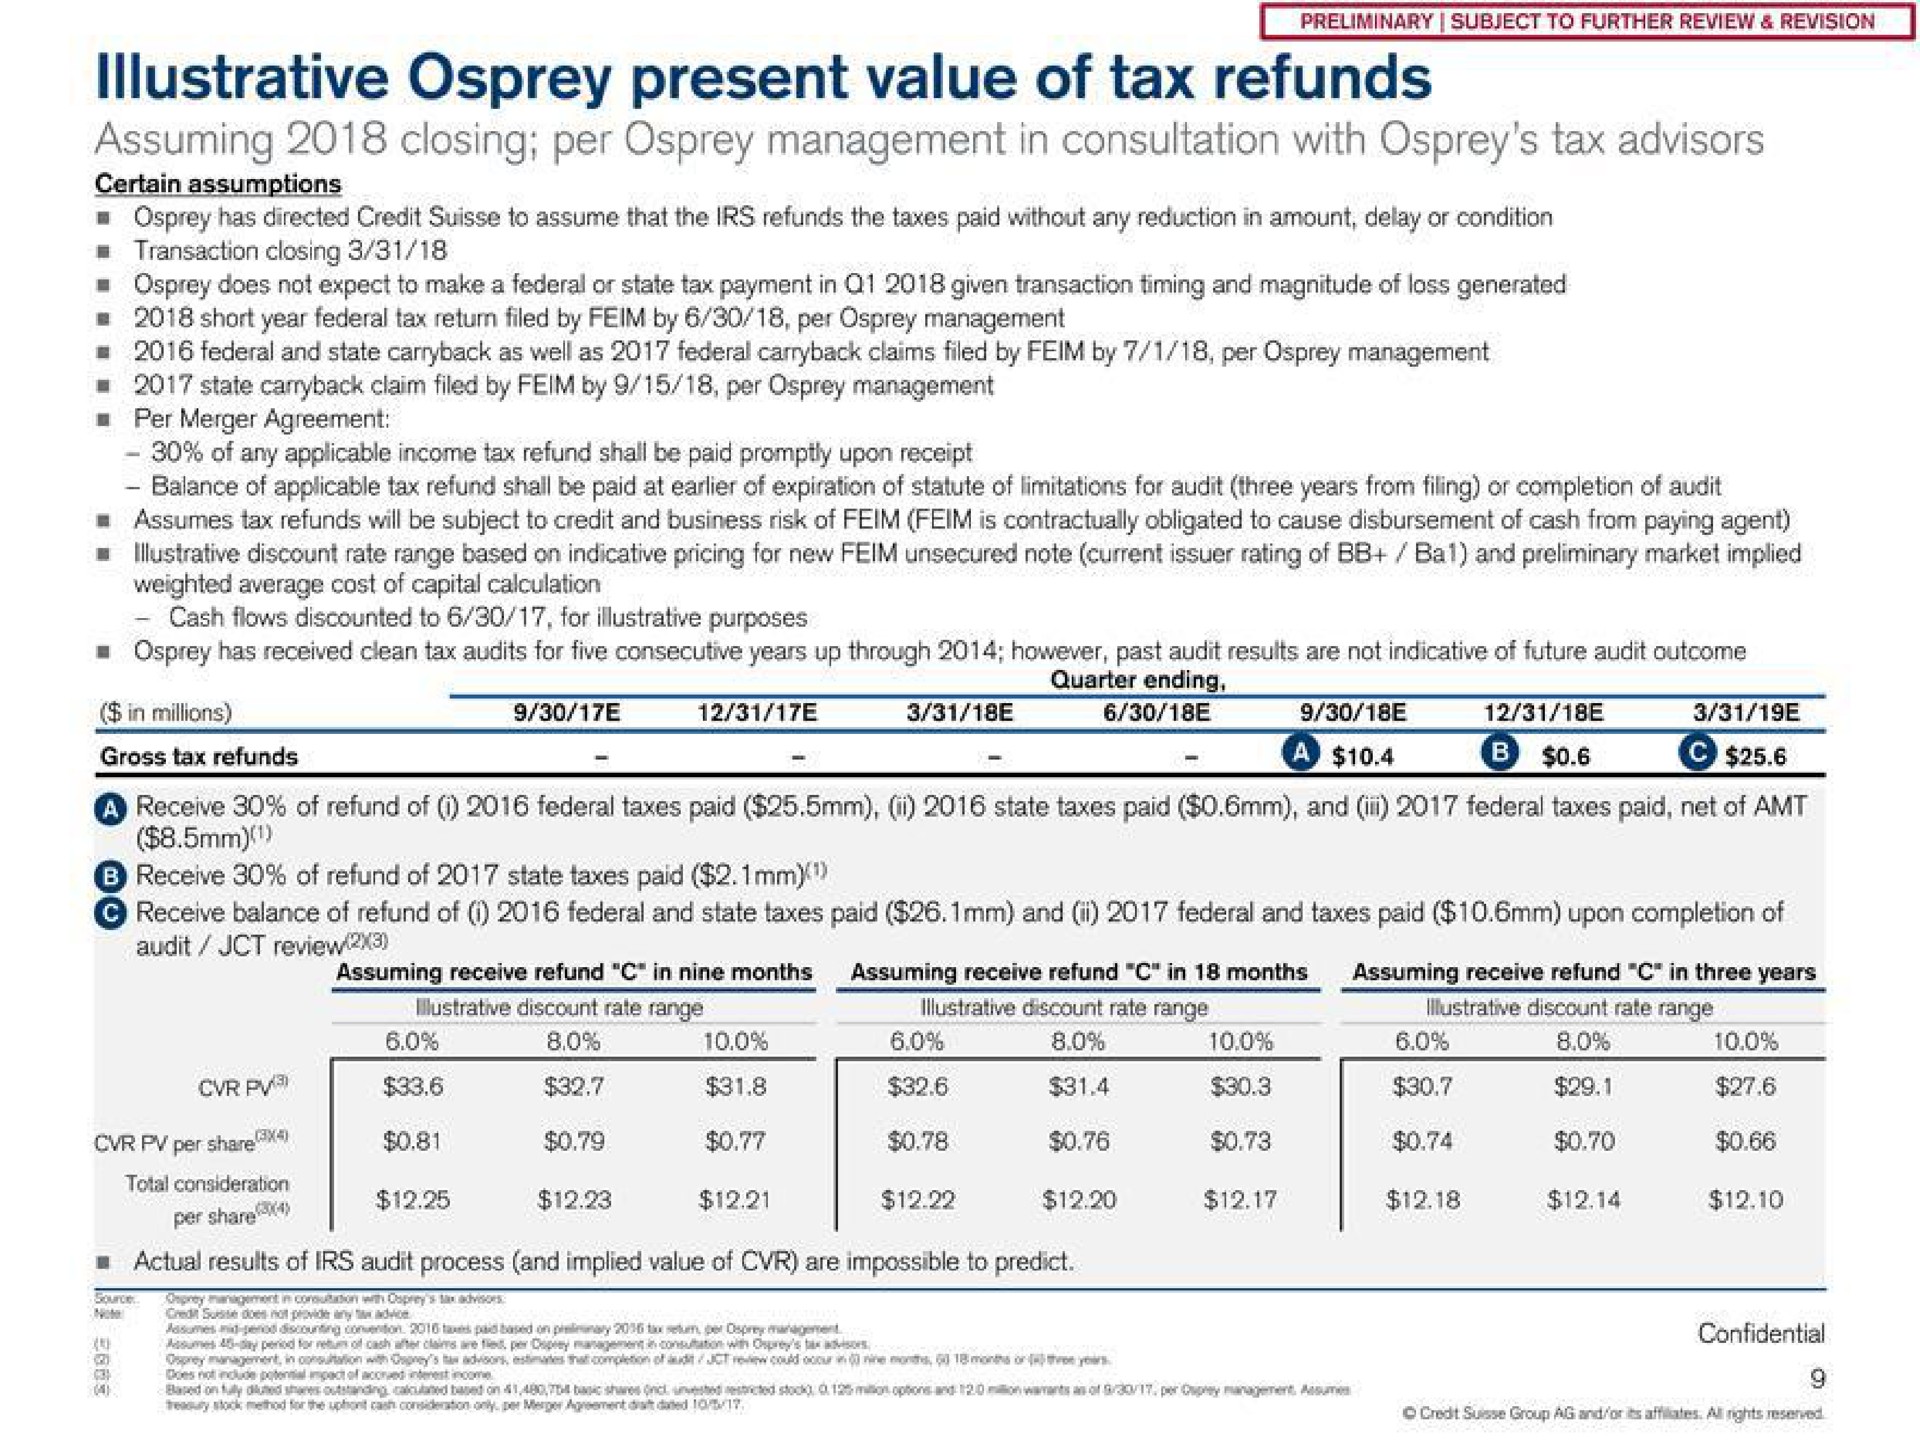 osprey present value of tax refunds assuming closing per osprey management in consultation with osprey tax advisors | Credit Suisse